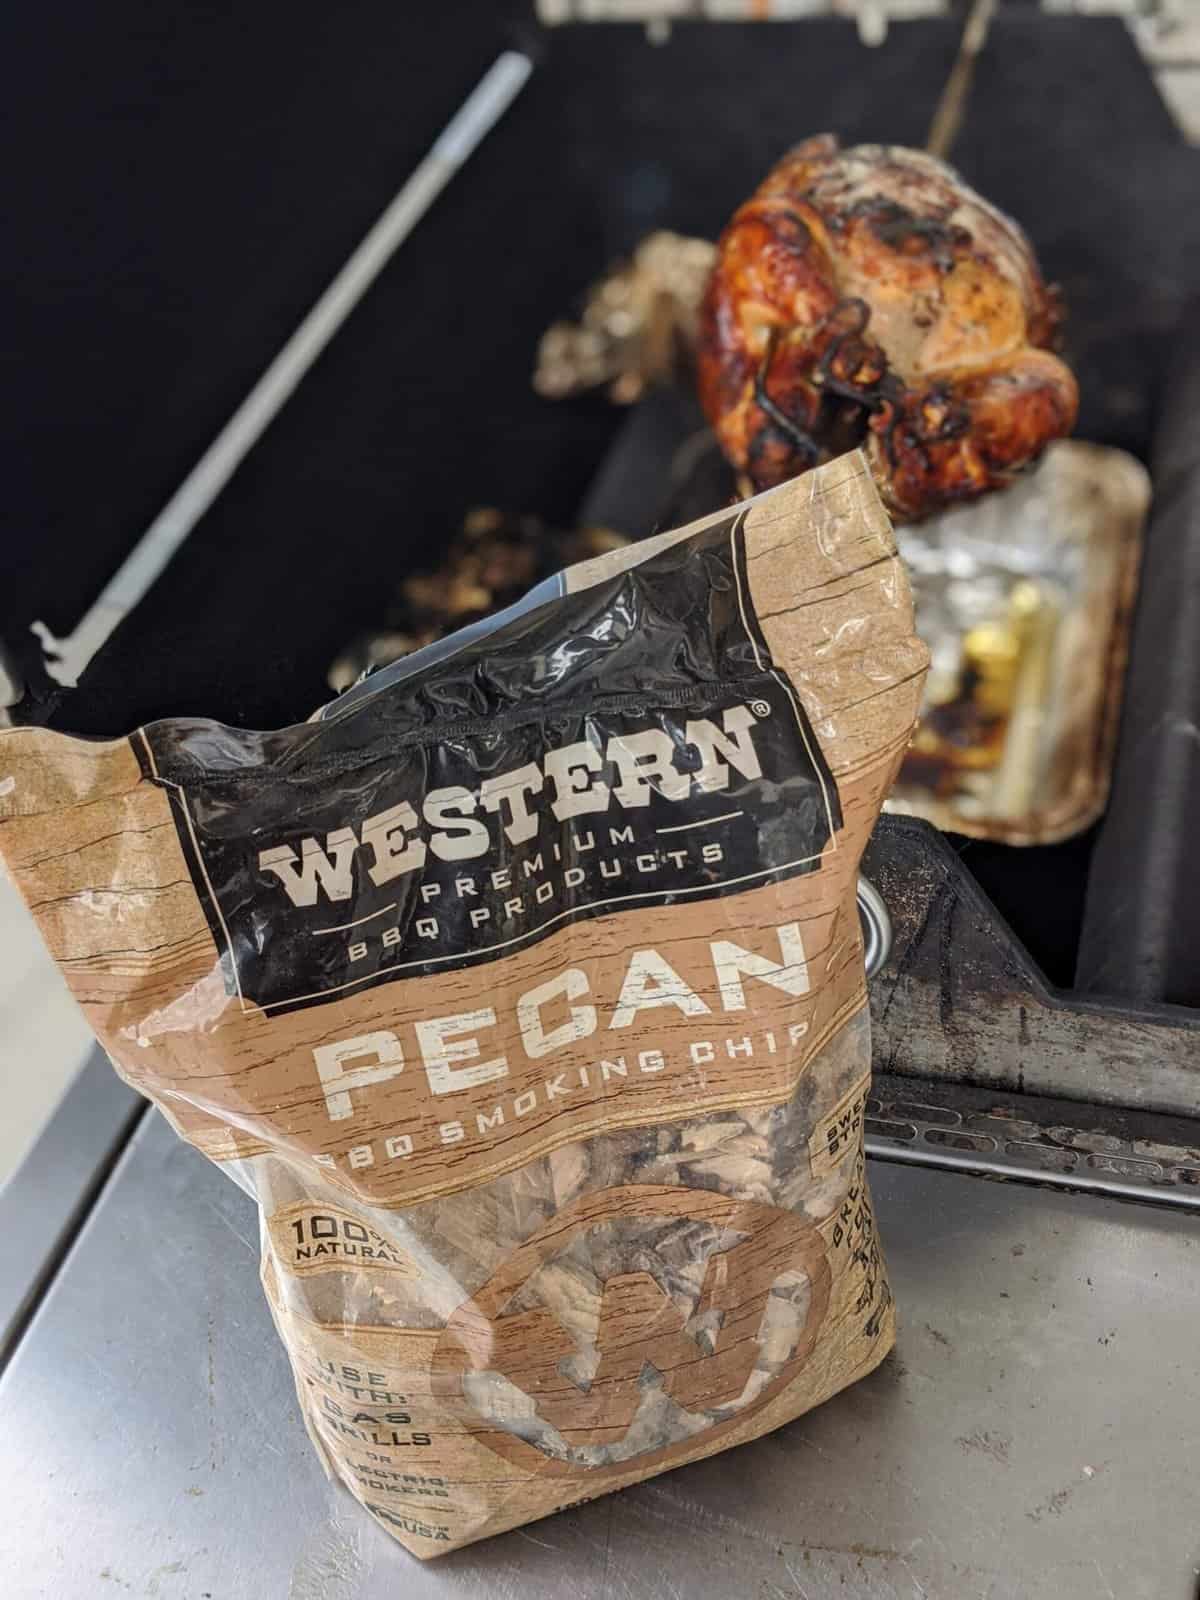 A bag of pecan wood in front of a rotisserie chicken on the grill.